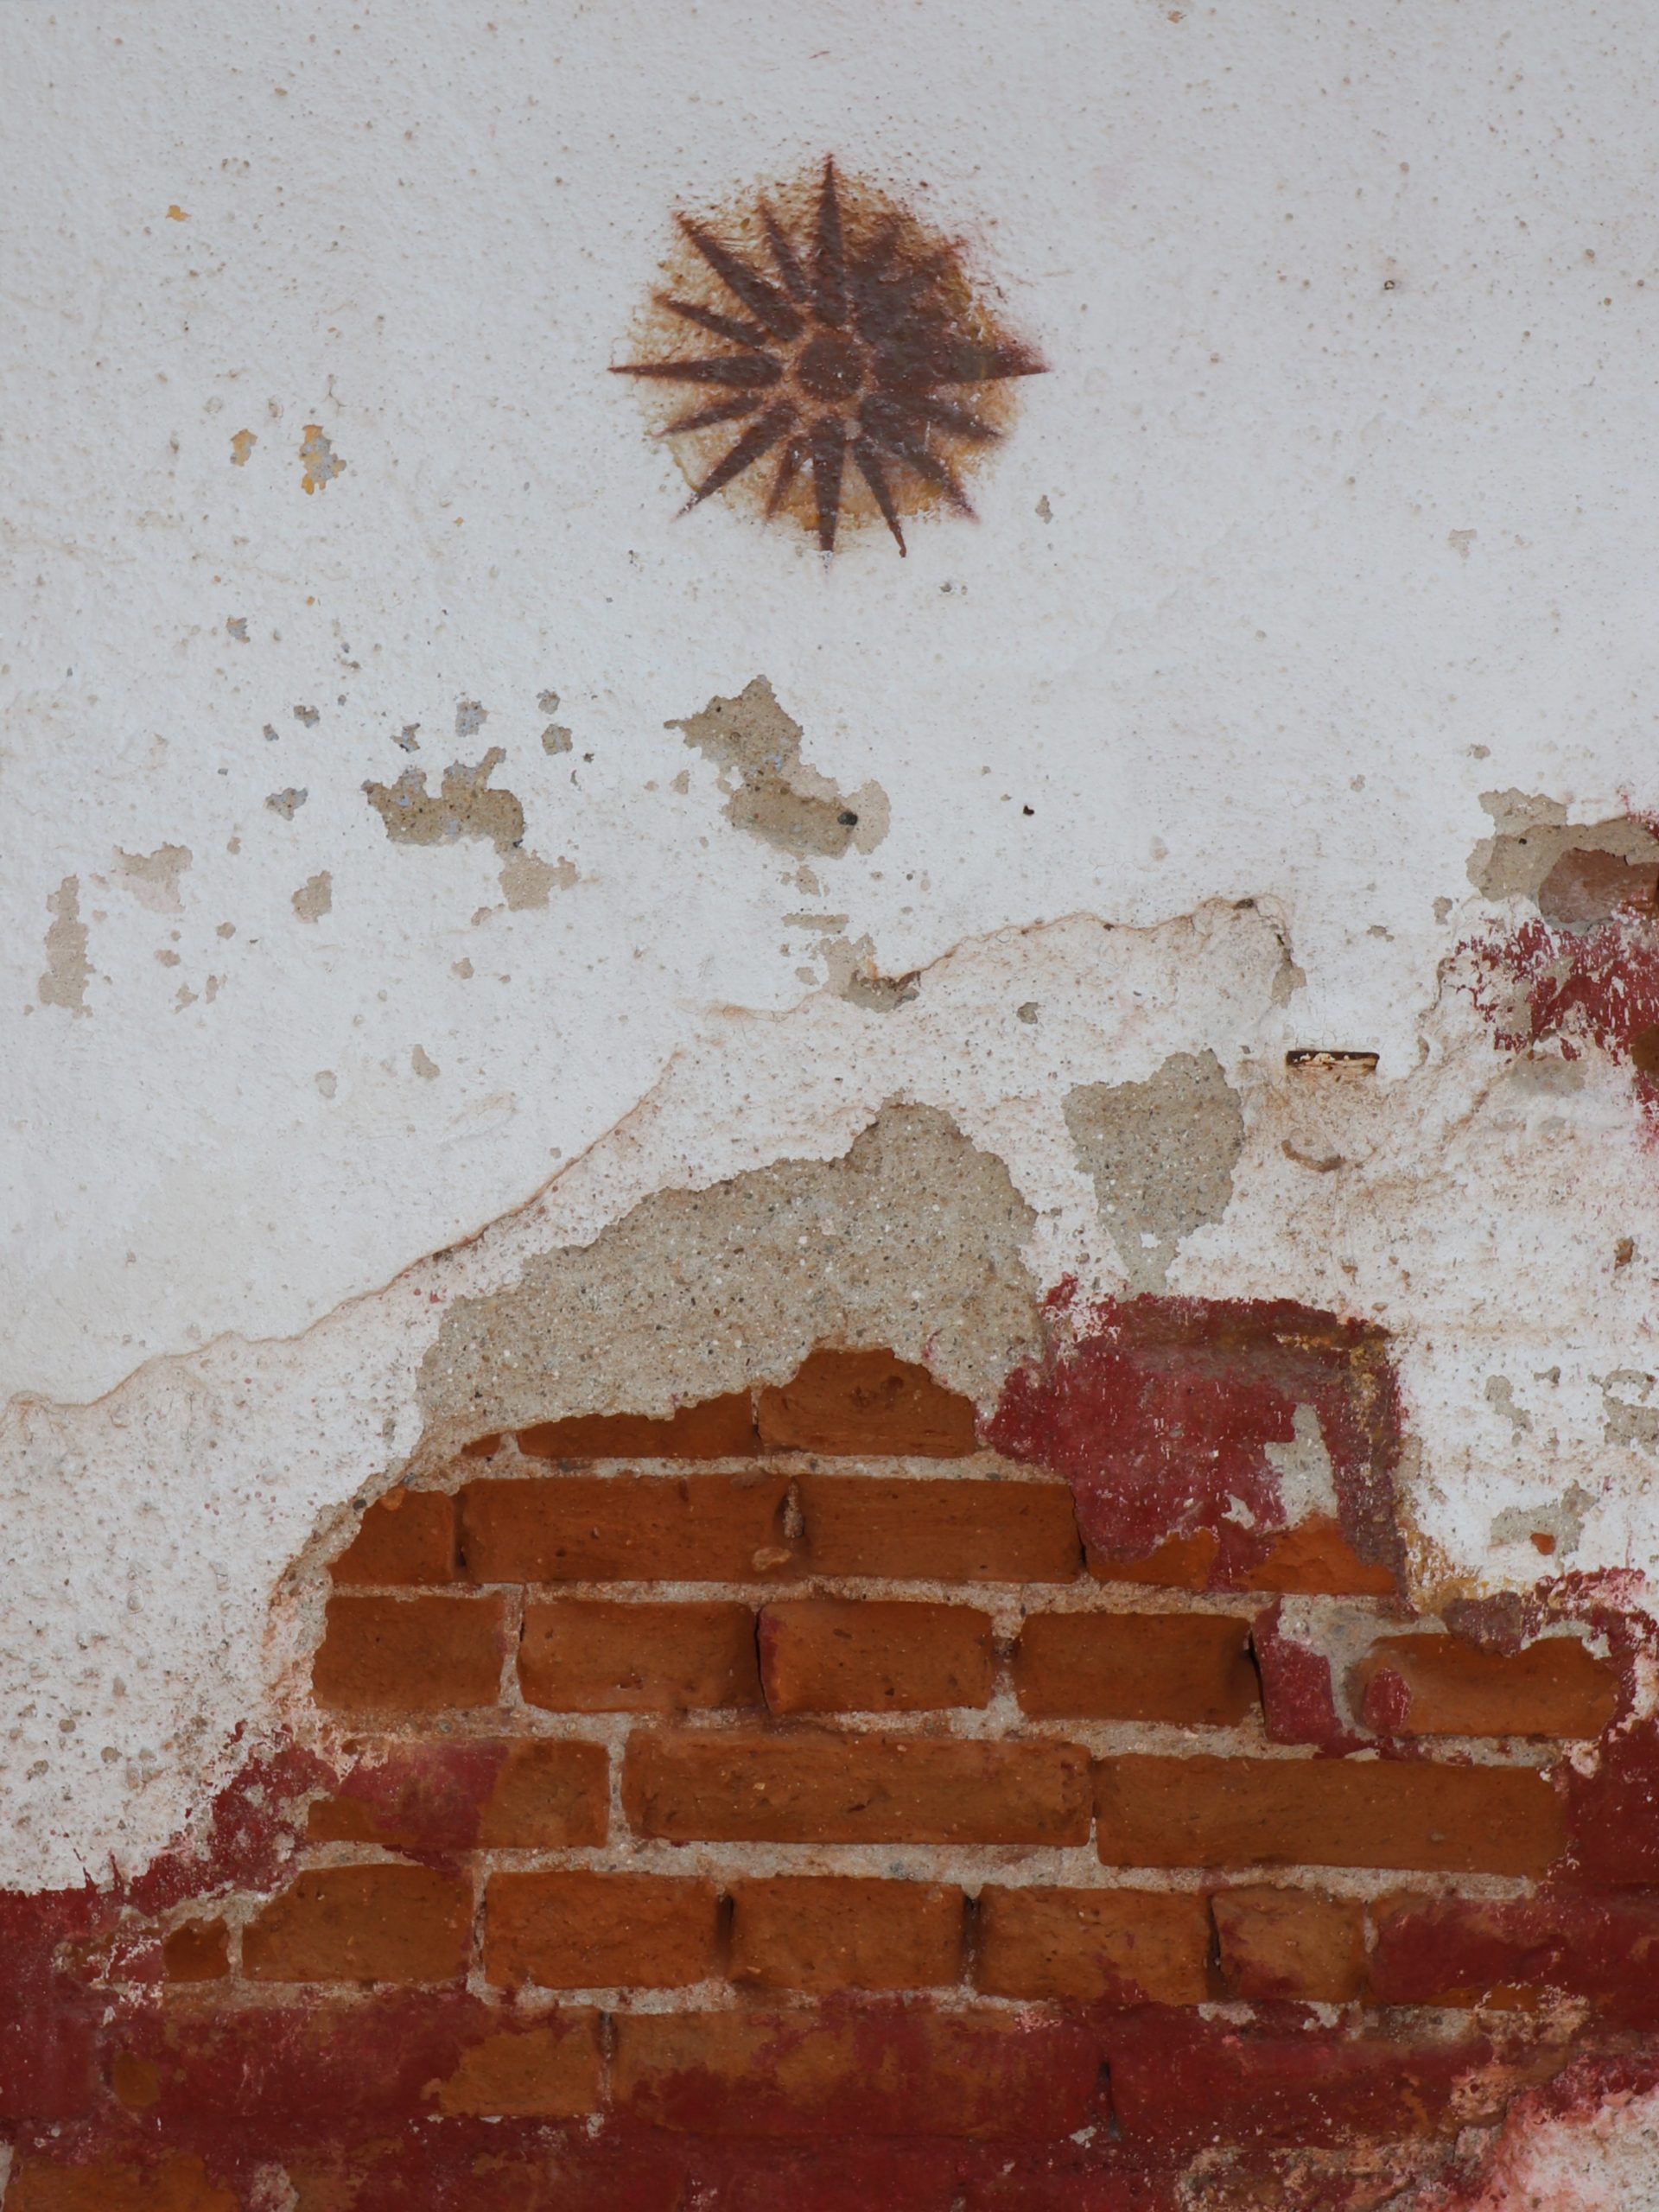 Macedonian shield on a wall with exposed brick